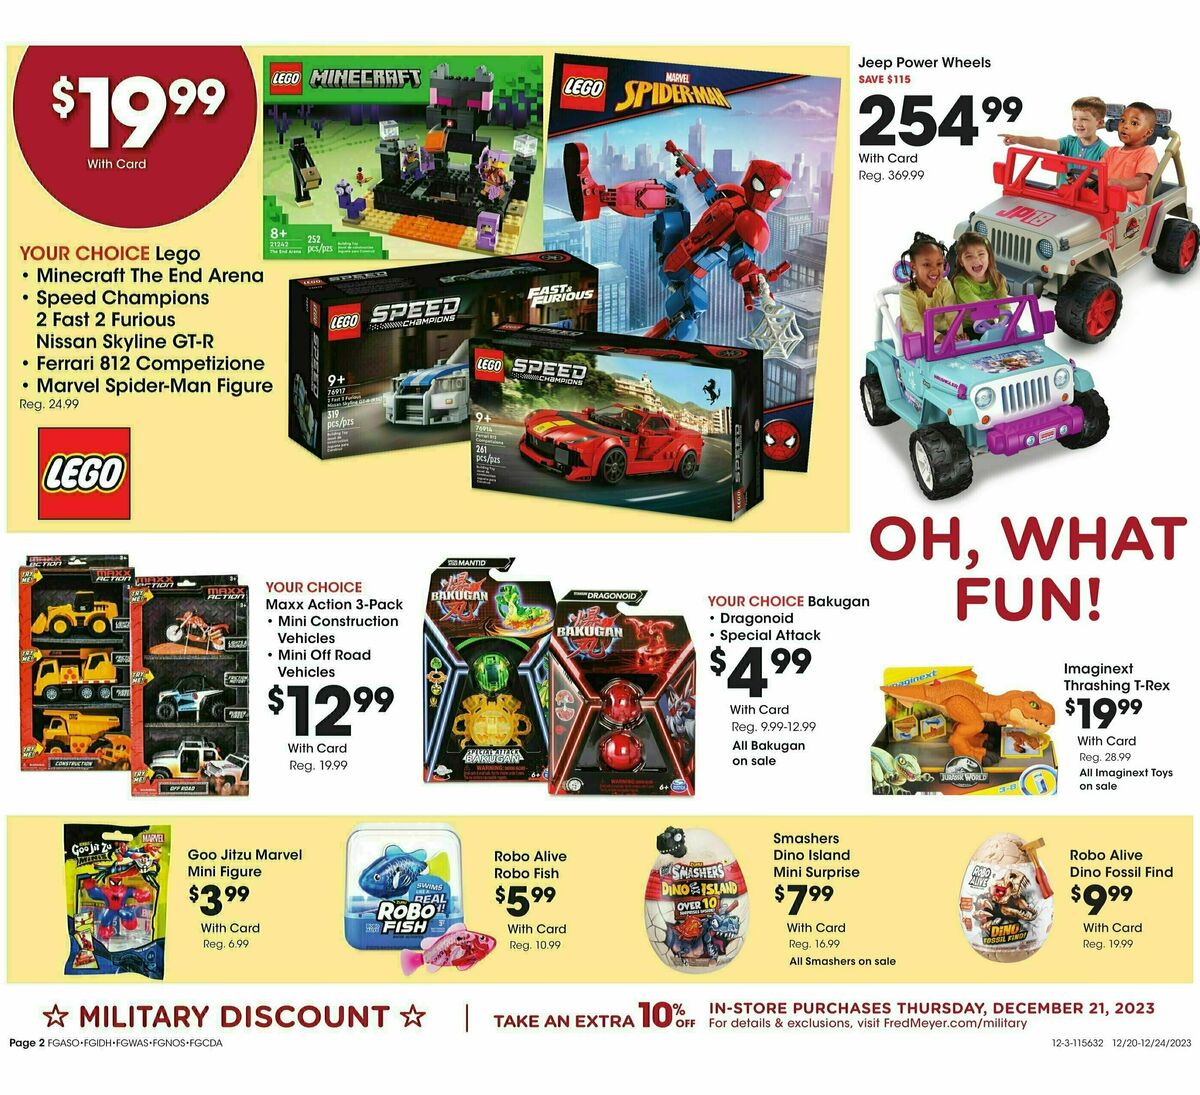 Fred Meyer General Merchandise Weekly Ad from December 20